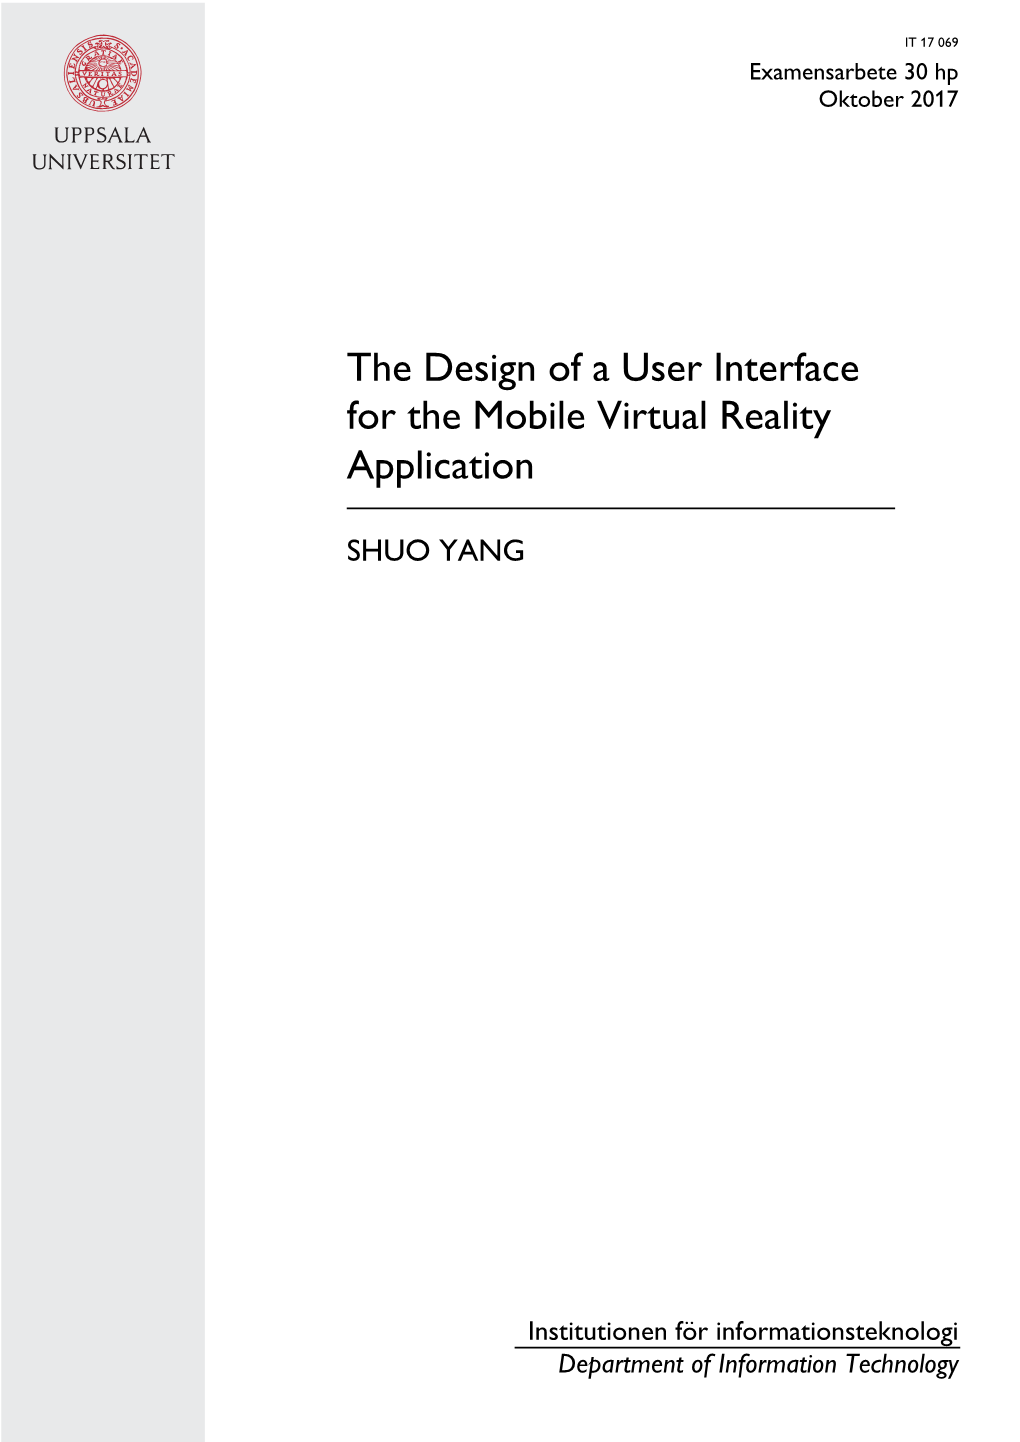 The Design of a User Interface for the Mobile Virtual Reality Application